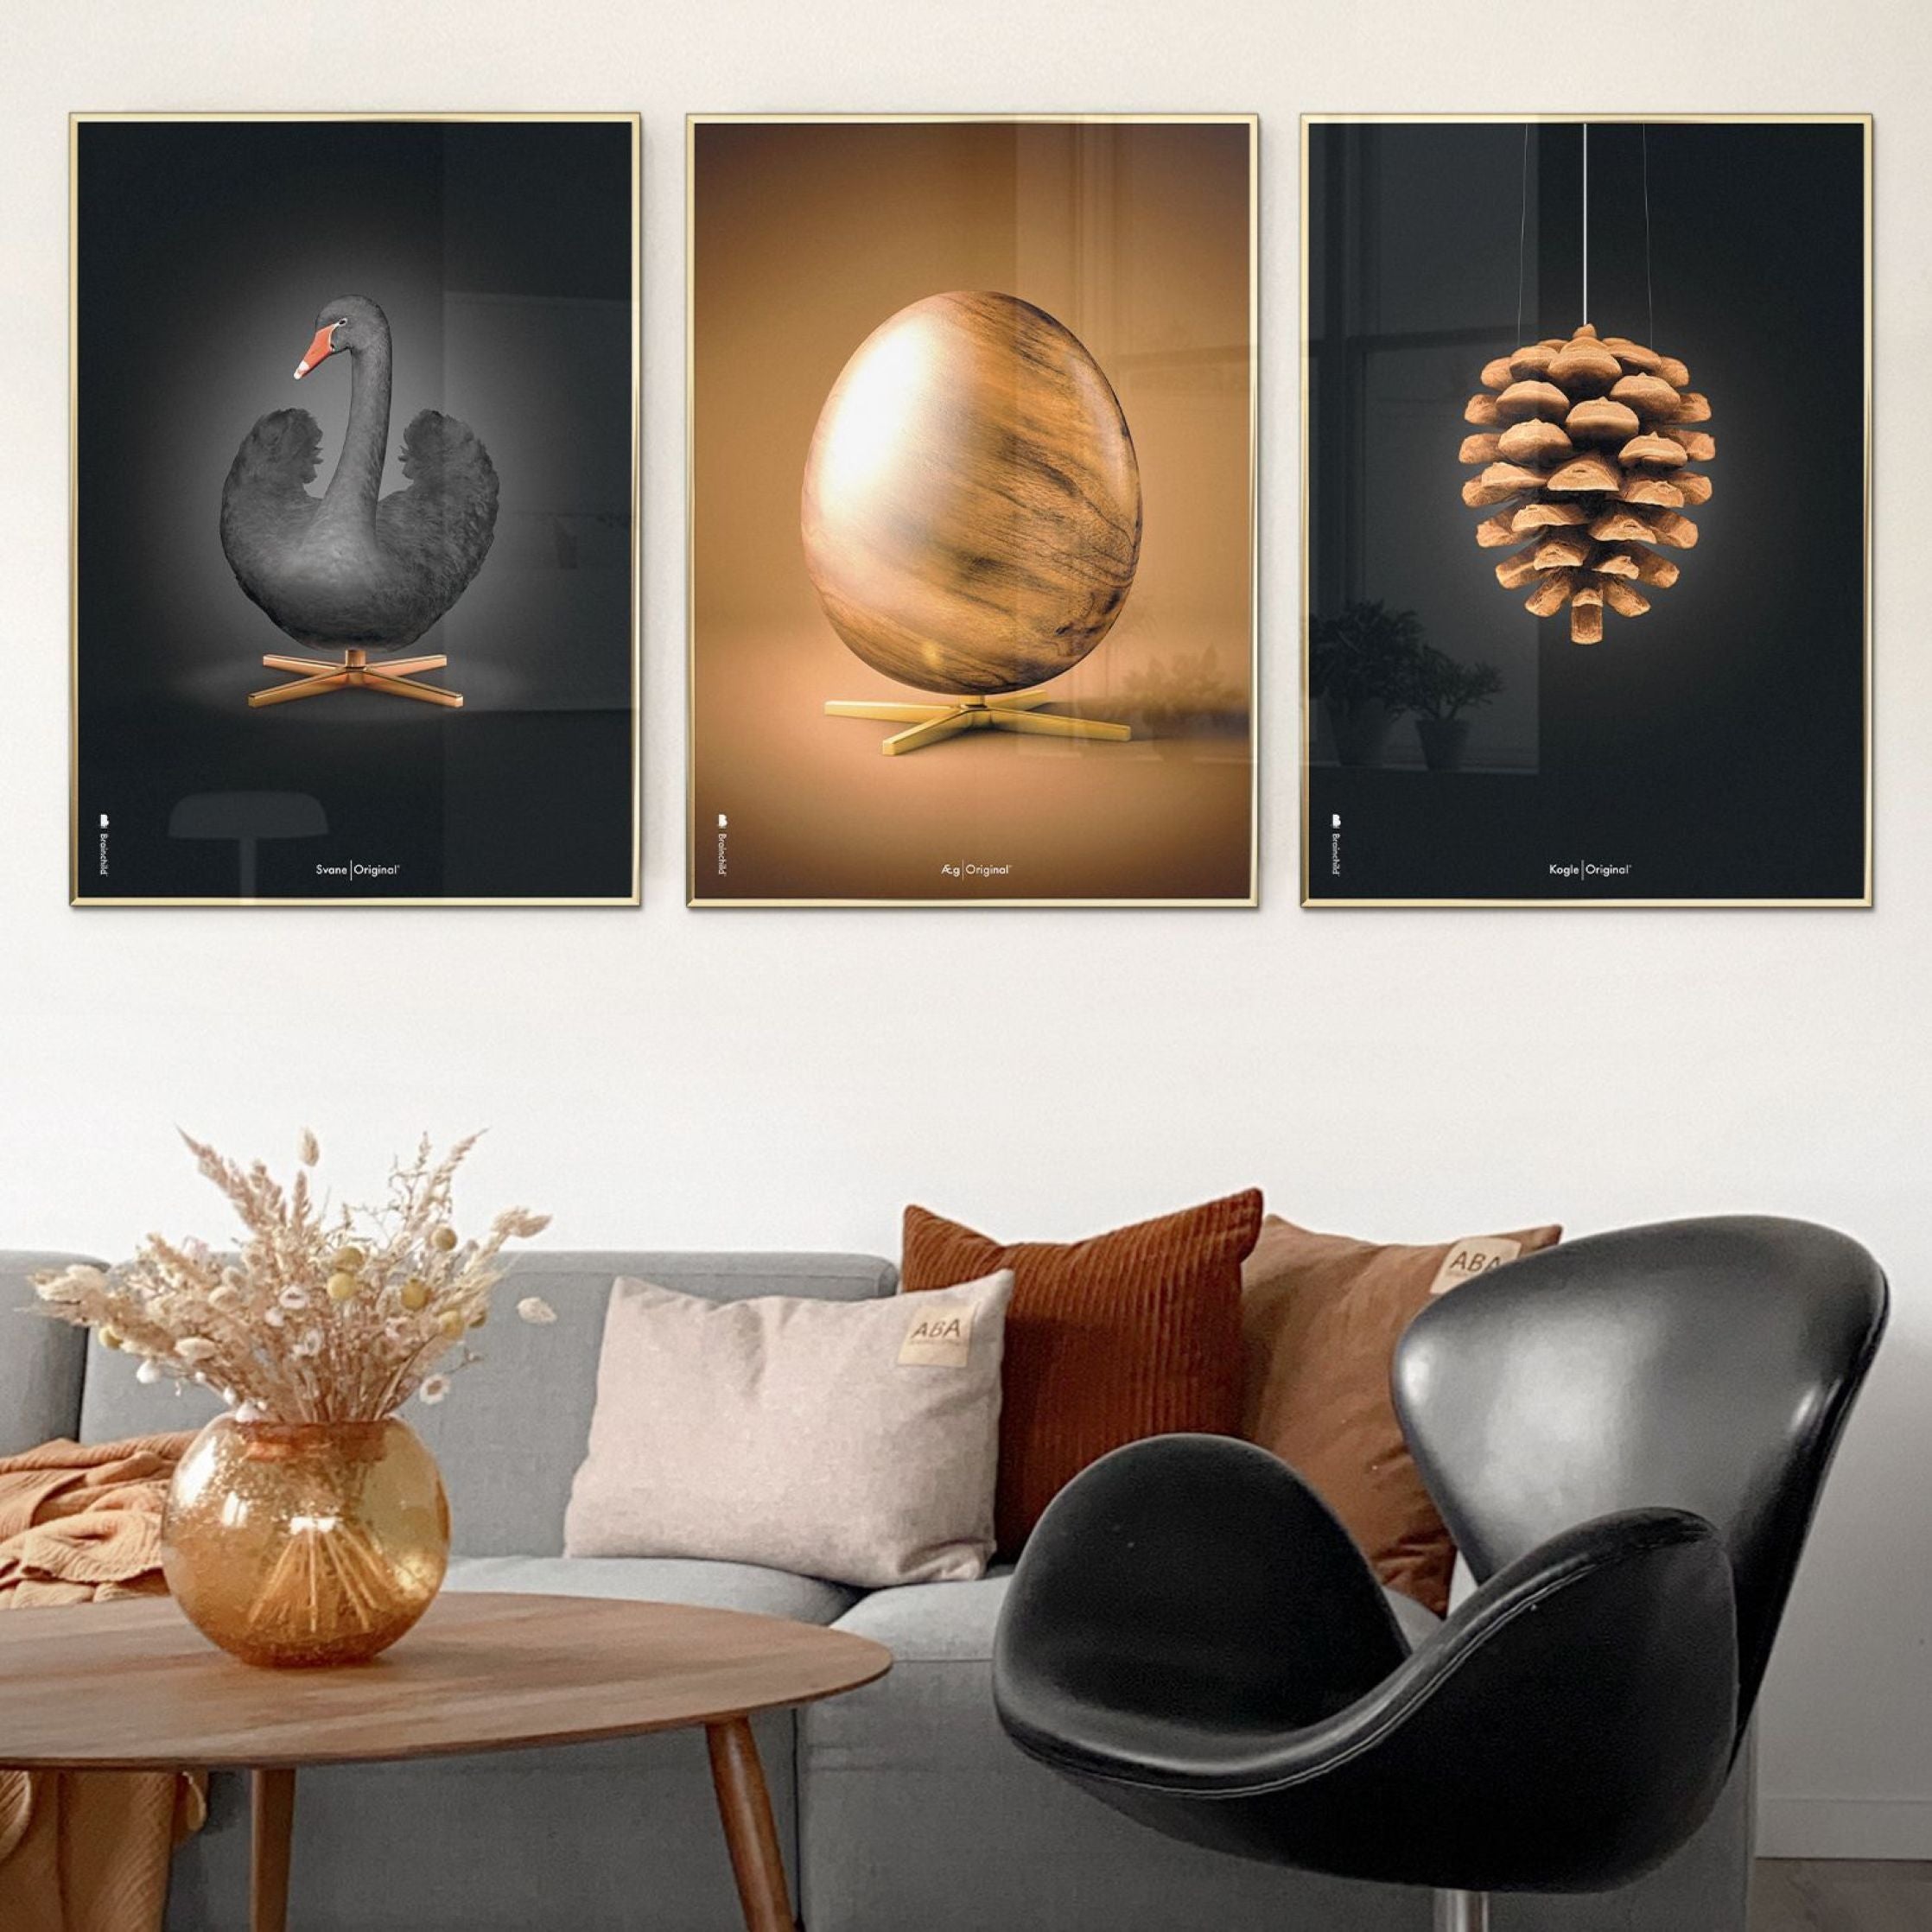 Brainchild Swan Classic Poster, Frame In Black Lacquered Wood A5, Black/Black Background